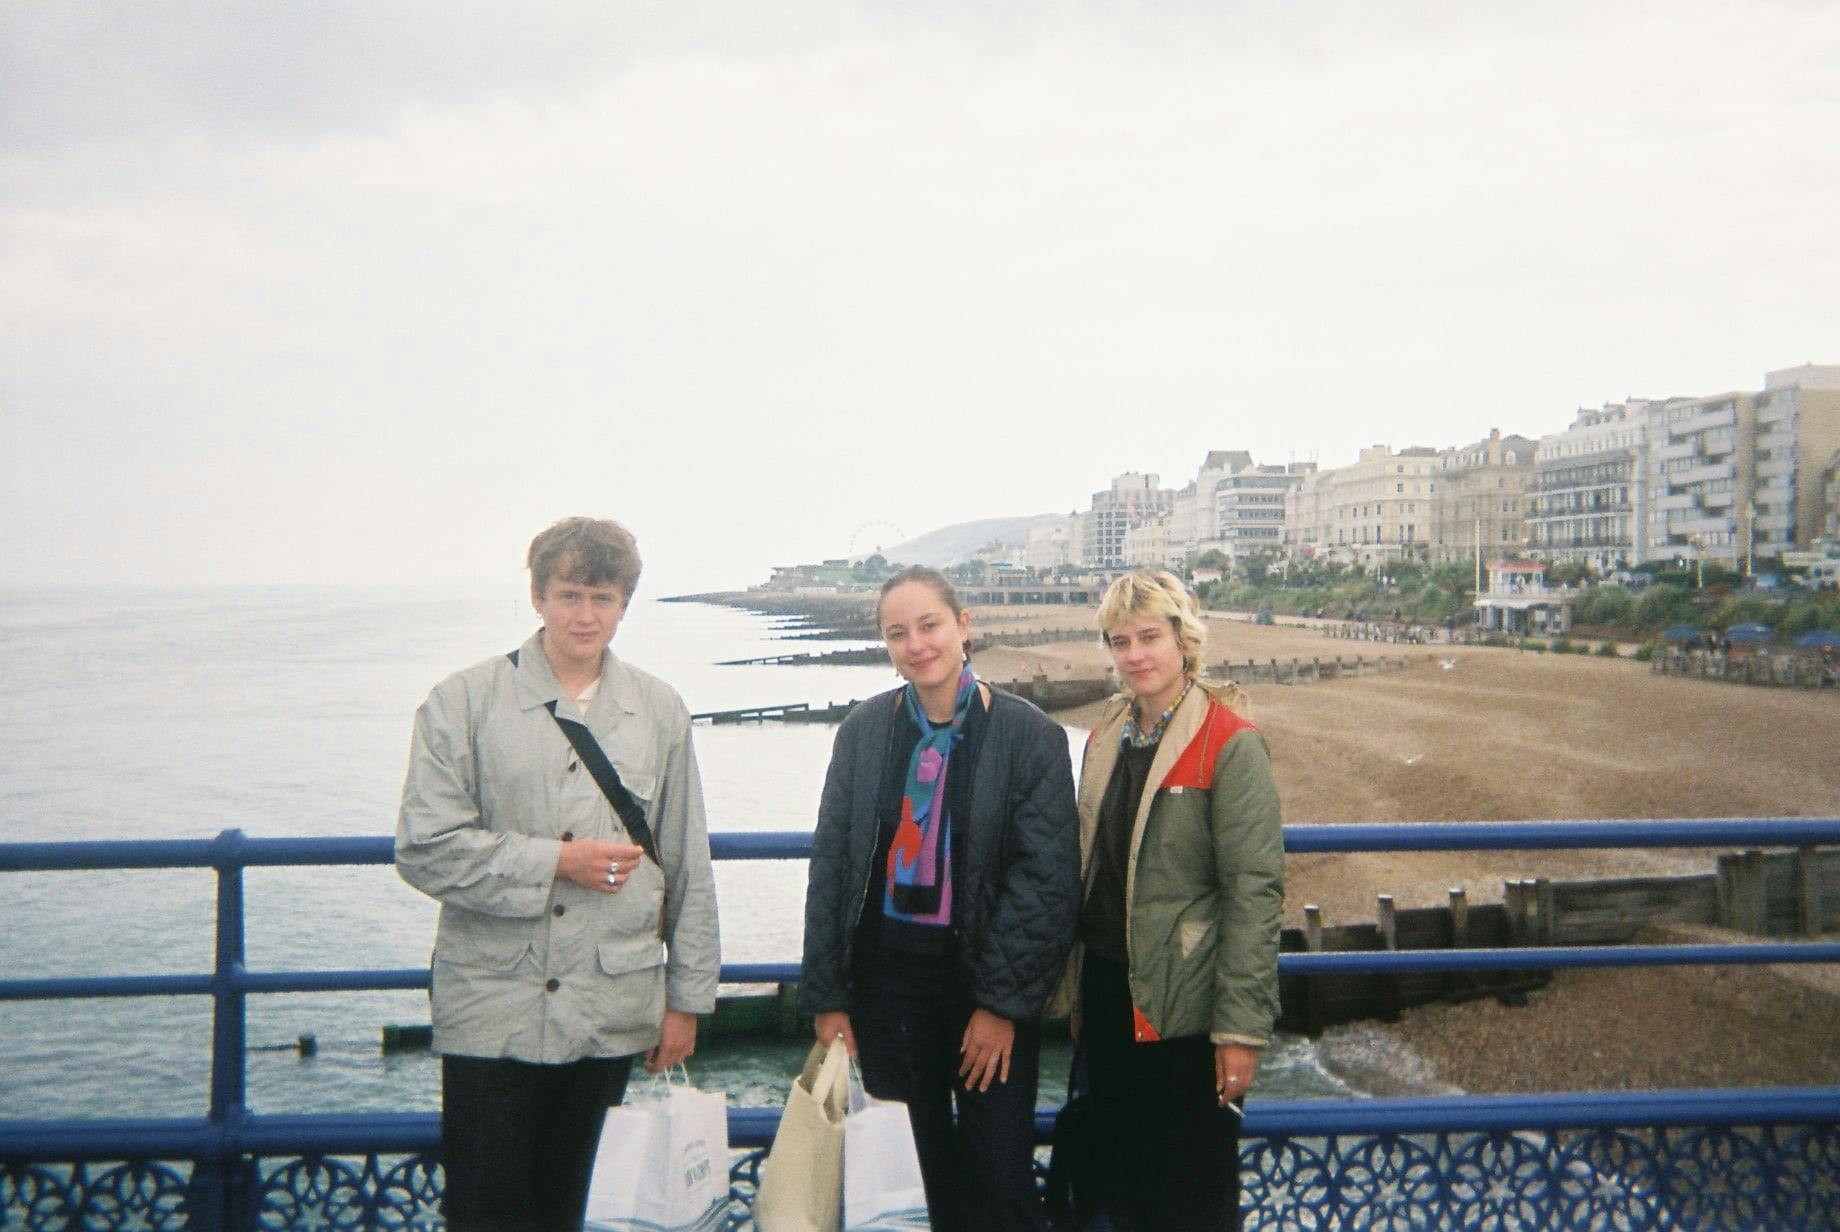 A Postcard To Independent Venues from The Orielles